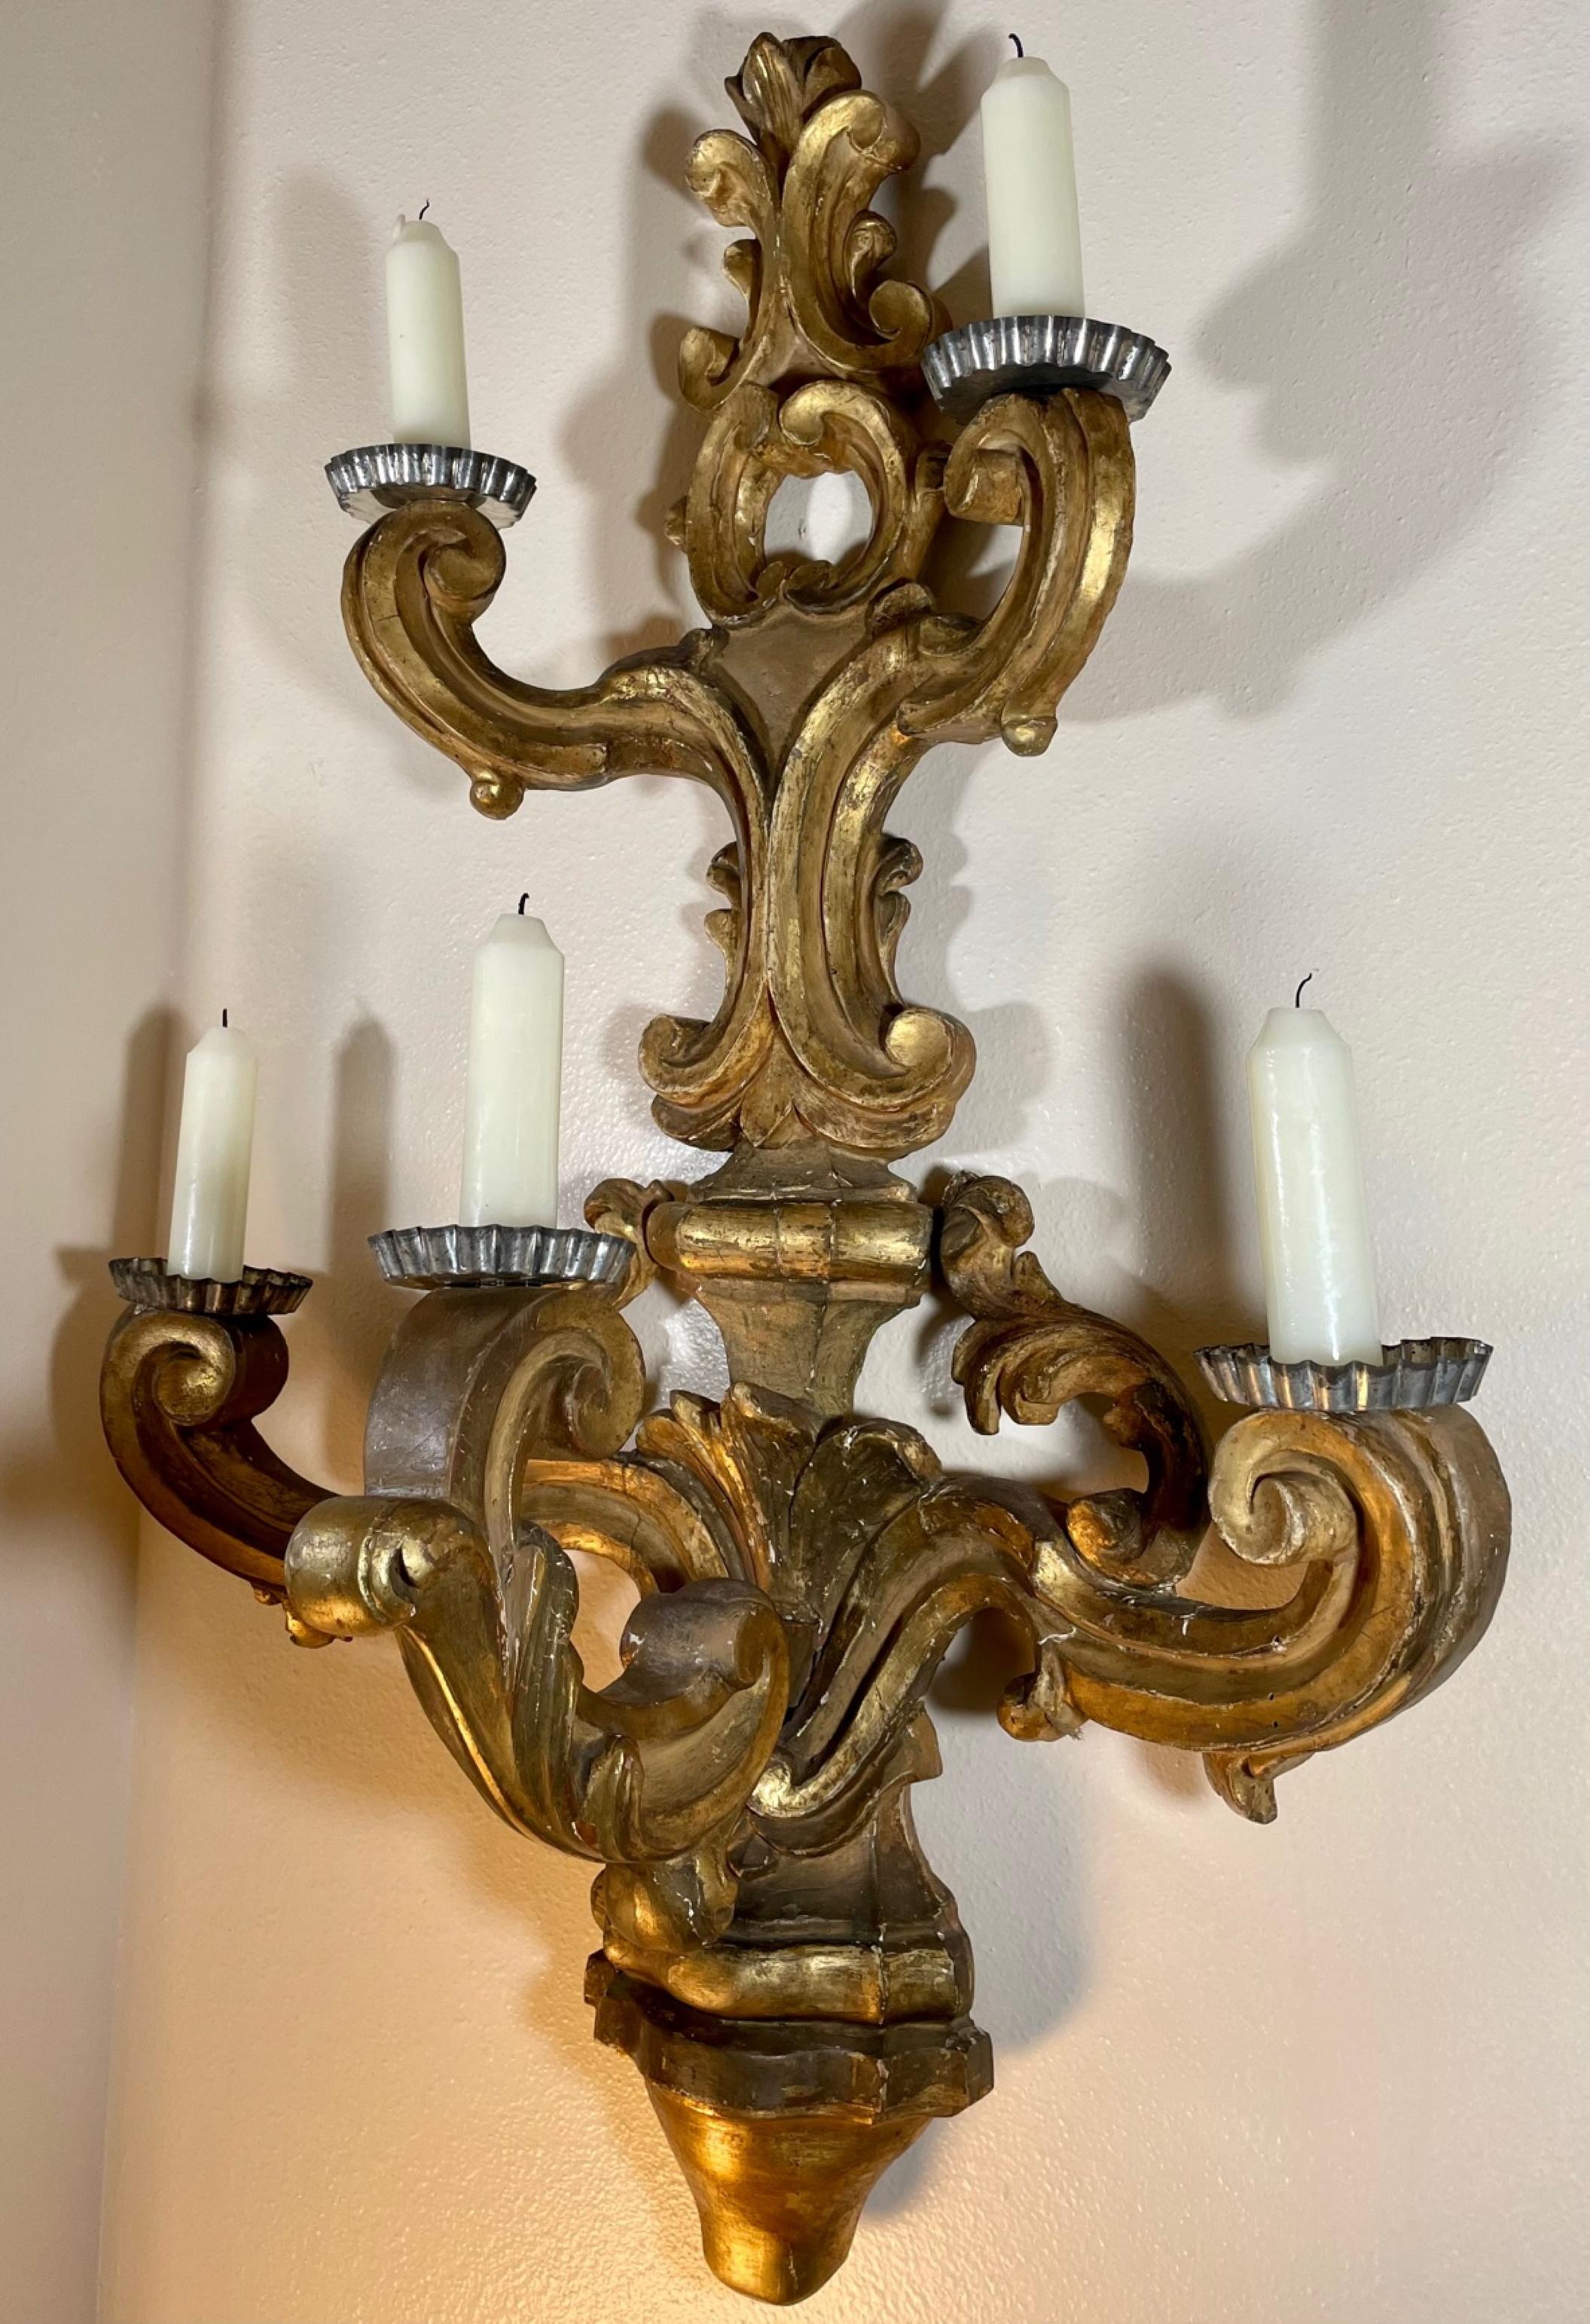 Large Louis XIV Baroque Italian carved giltwood wall sconce

Large early 18th century Italian hand carved and gilded 6-light wall sconce. This carving is on a grand scale and ornately detailed. The gilding is original with minor restorations.